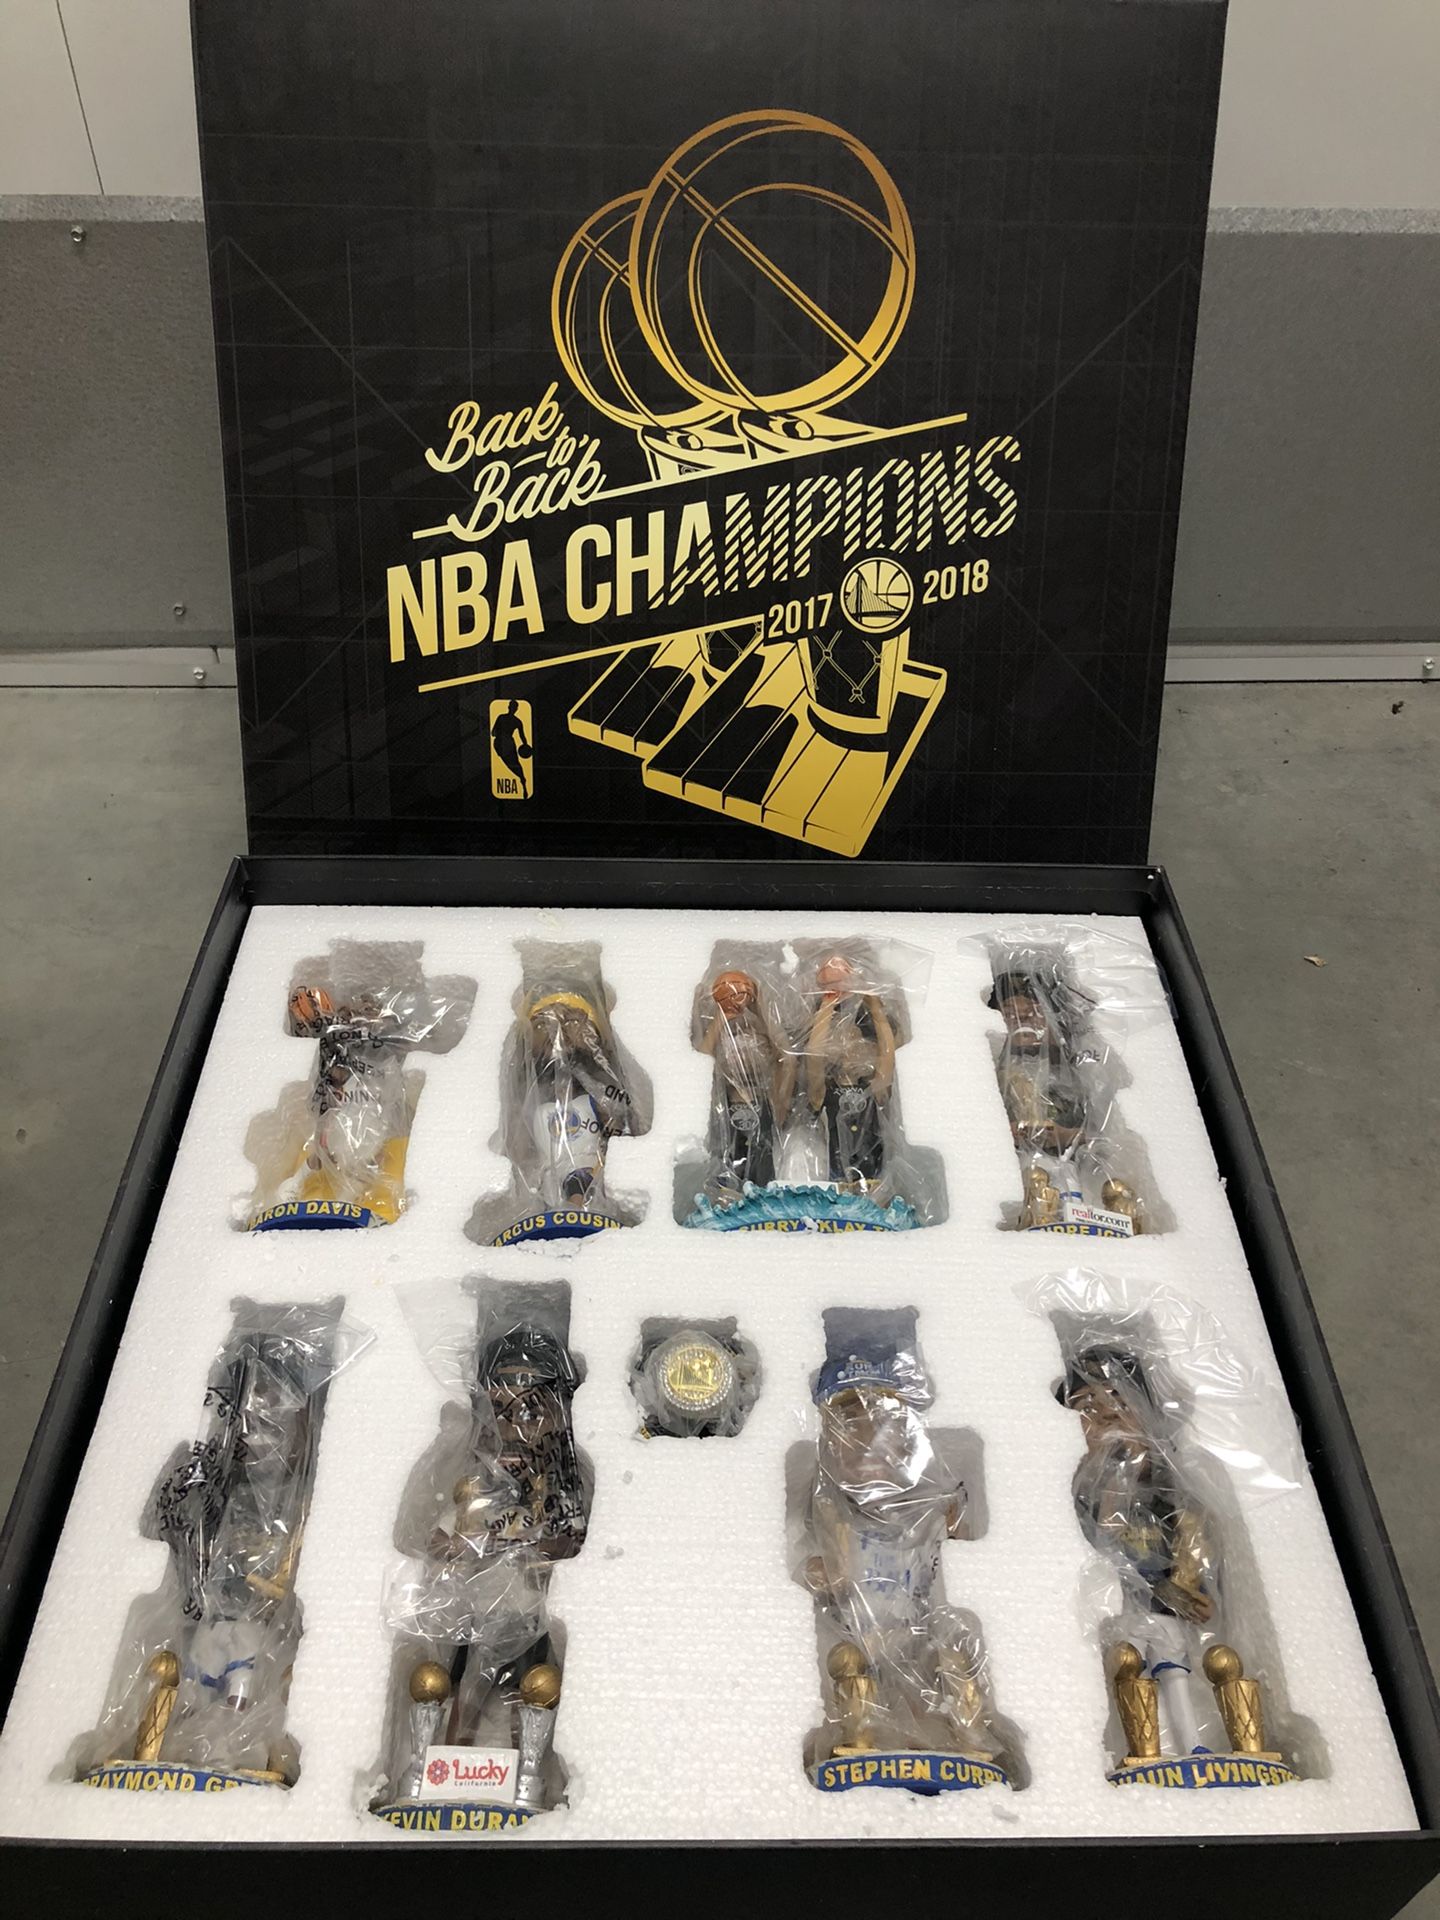 Golden State Warriors 2017-18 Back to Back NBA Champions Complete Bobblehead Set